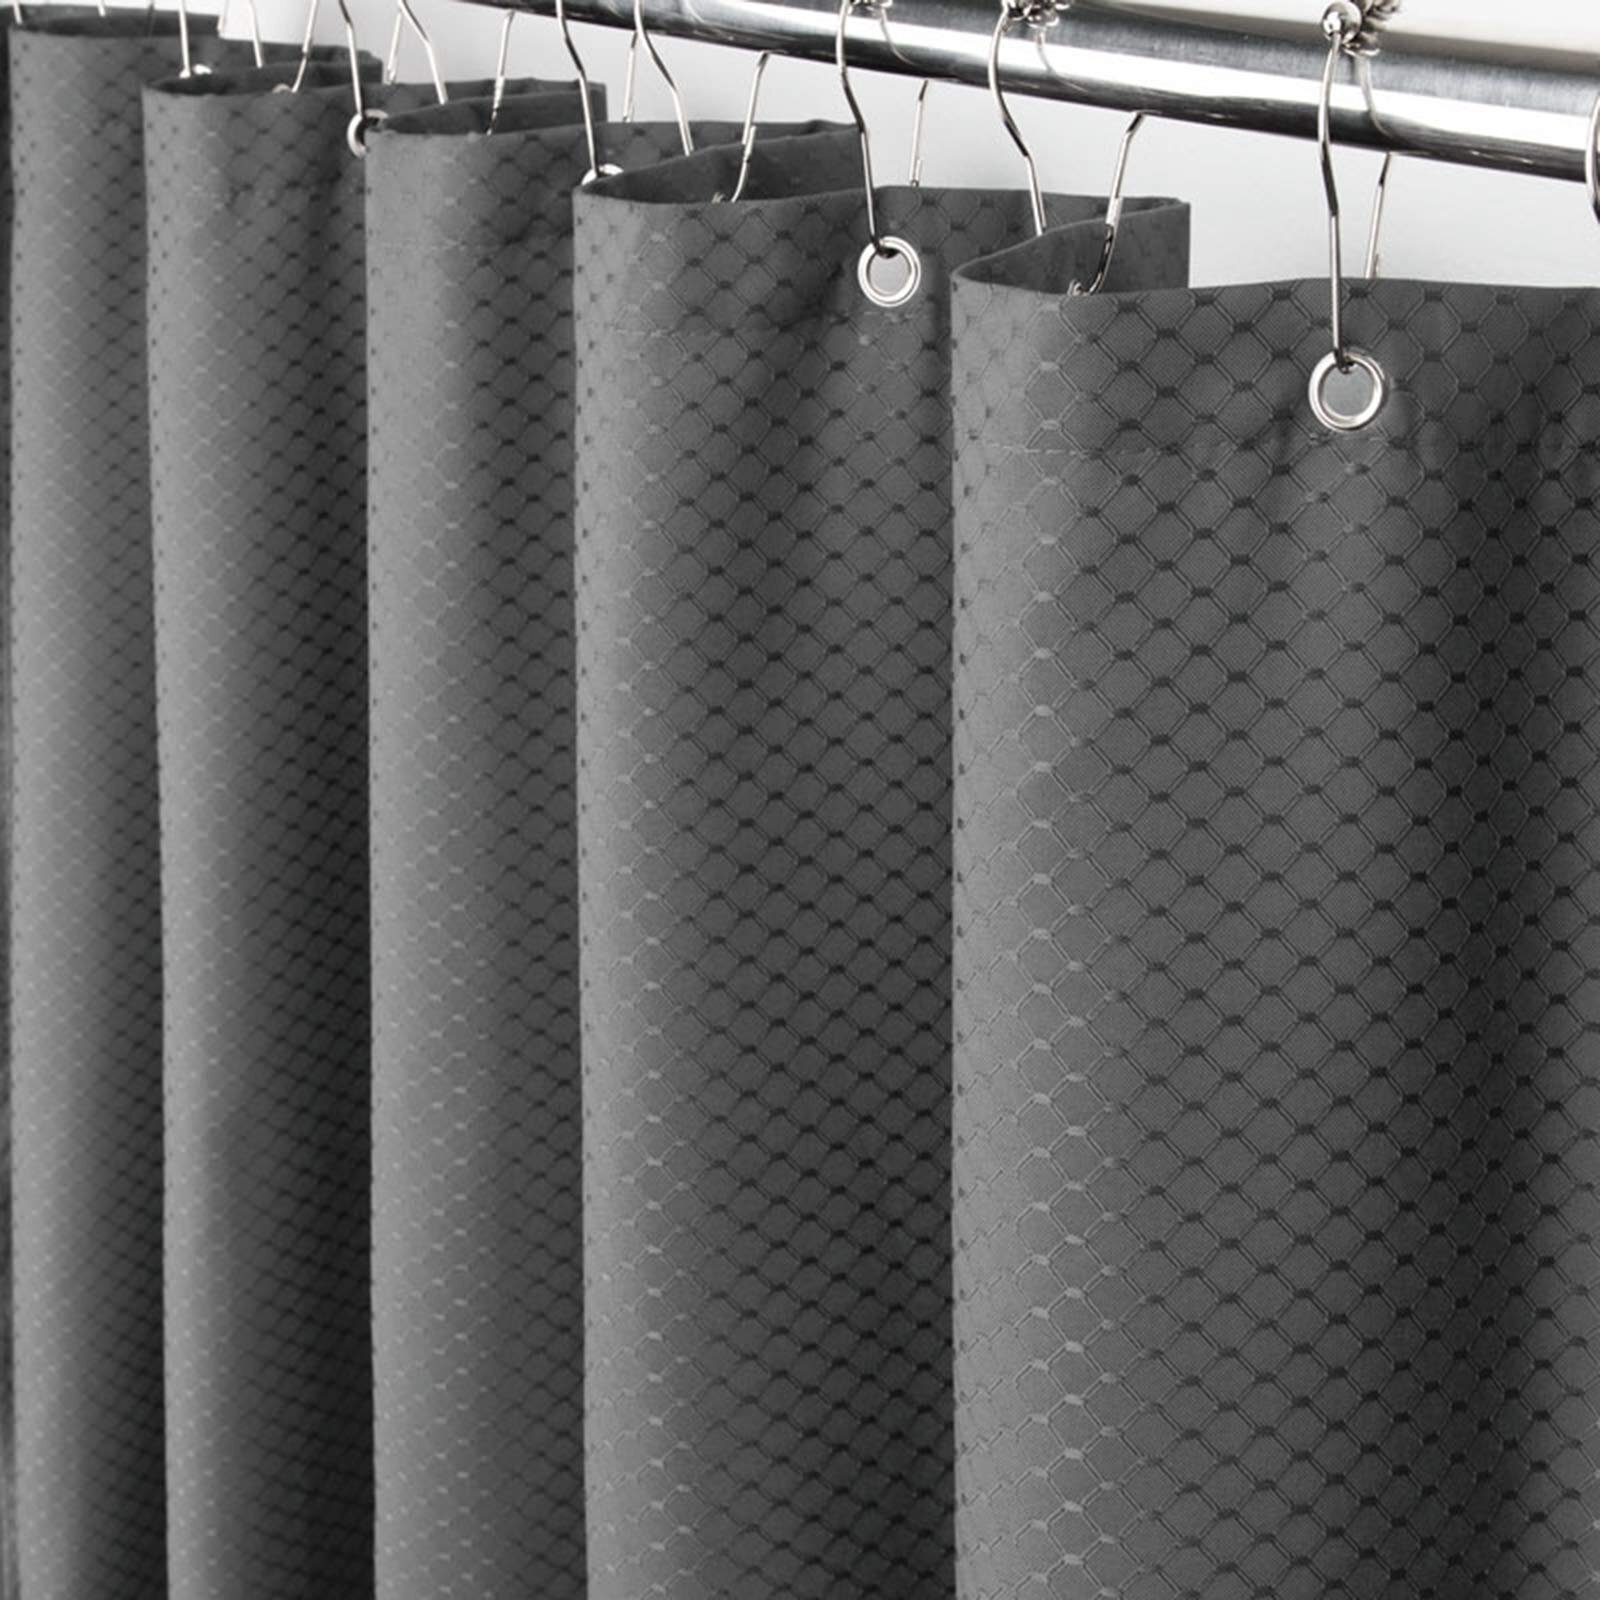 Rust/Spice 100% Water Repellent PEVA Shower Curtain Liner Standard Size 